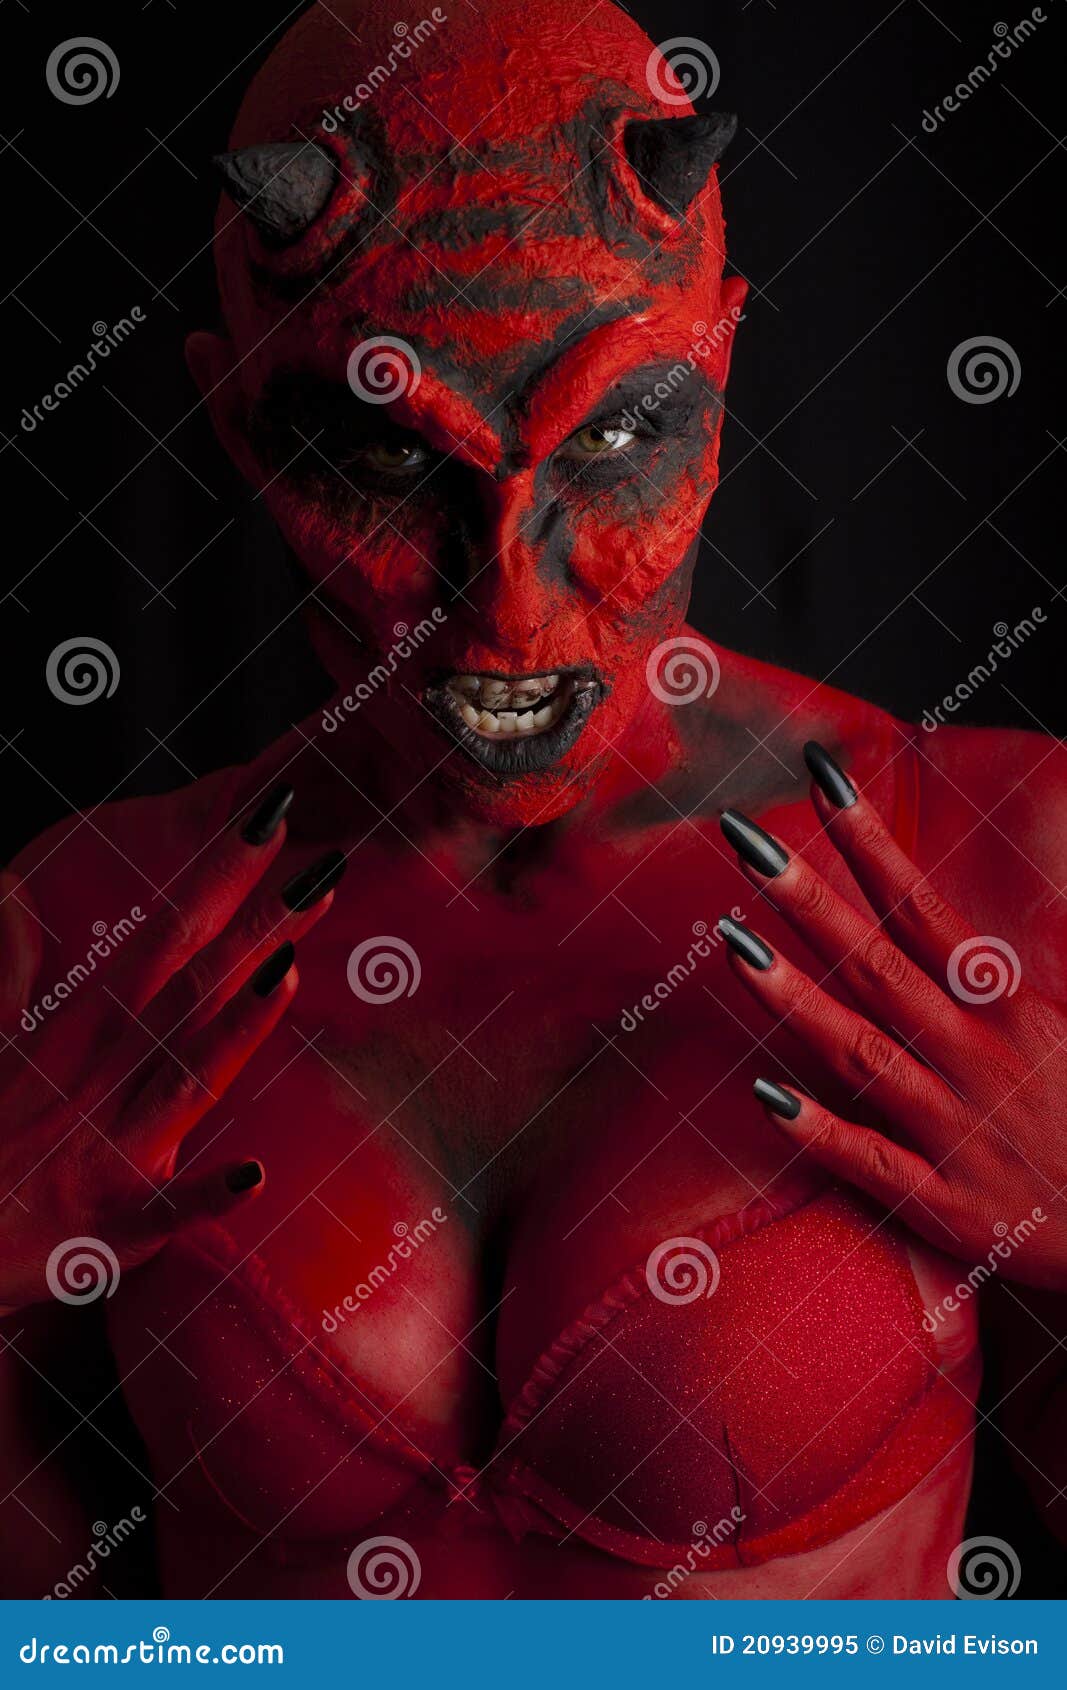 Photo about Red devil woman, low key lighting. 